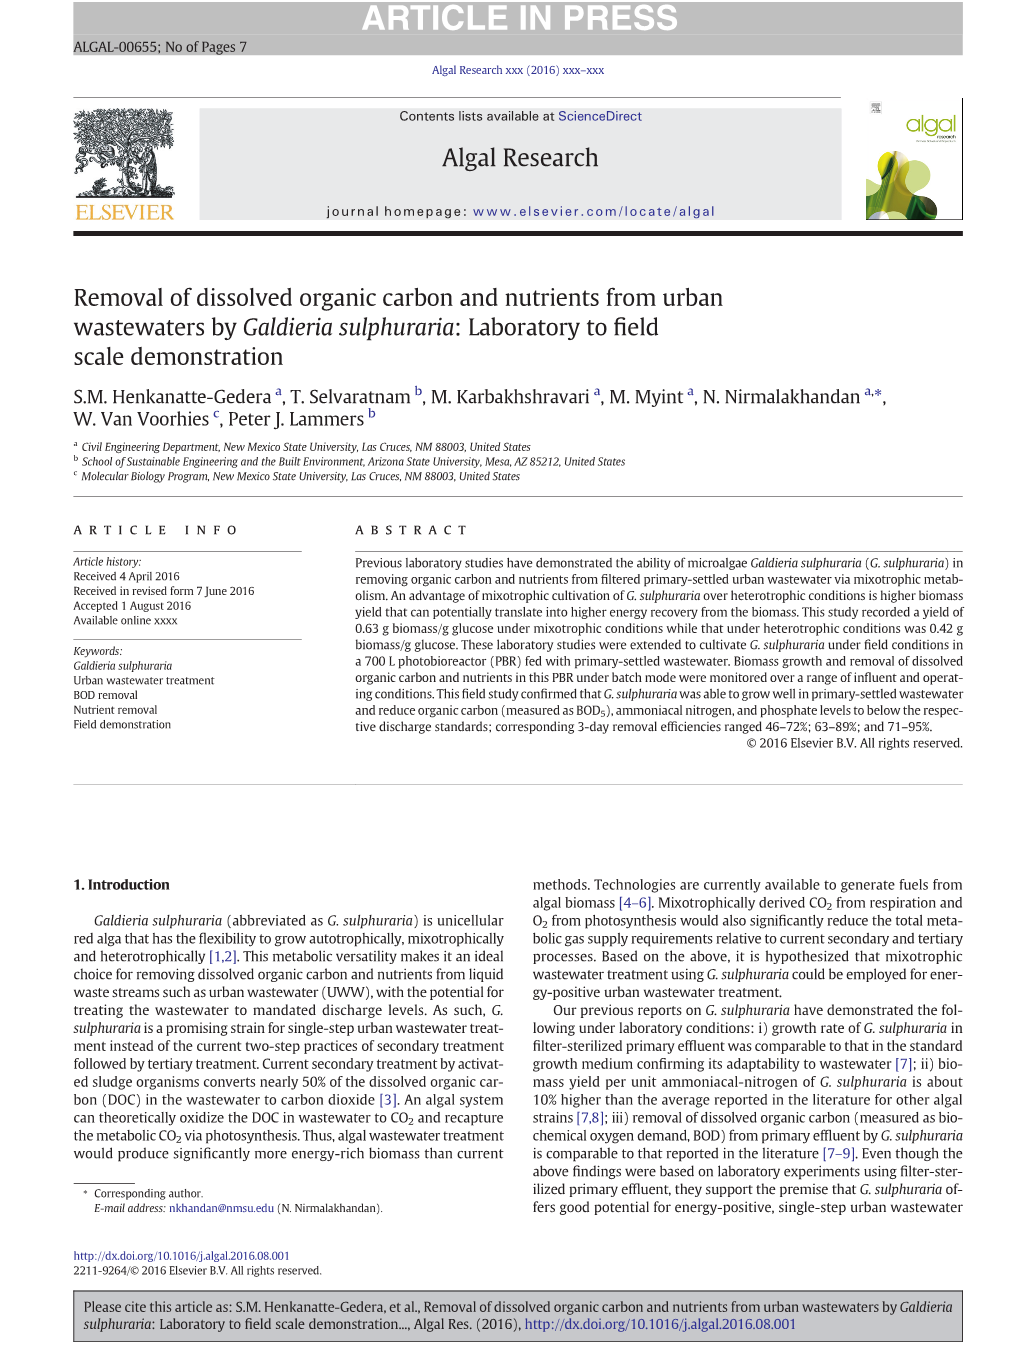 Removal of Dissolved Organic Carbon and Nutrients from Urban Wastewaters by Galdieria Sulphuraria: Laboratory to ﬁeld Scale Demonstration